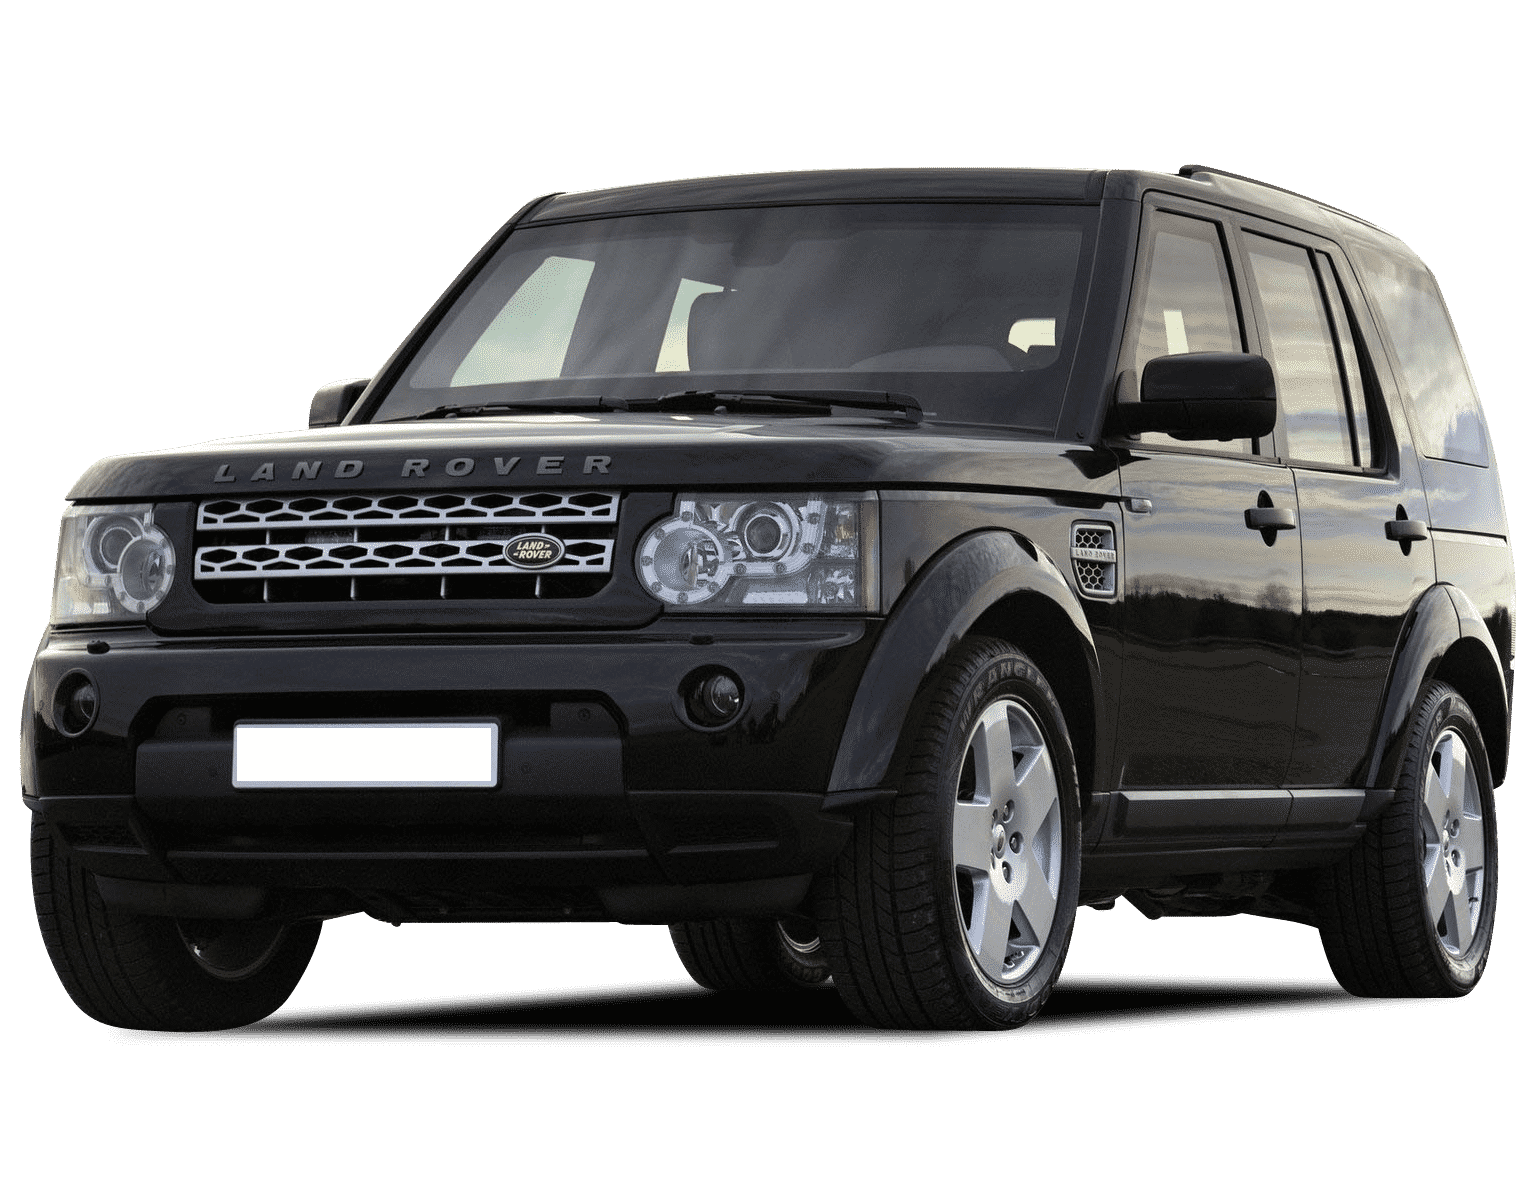 LAND ROVER DISCOVERY 4 5.0 V8 ▶ Impuesto Vehicular ≫